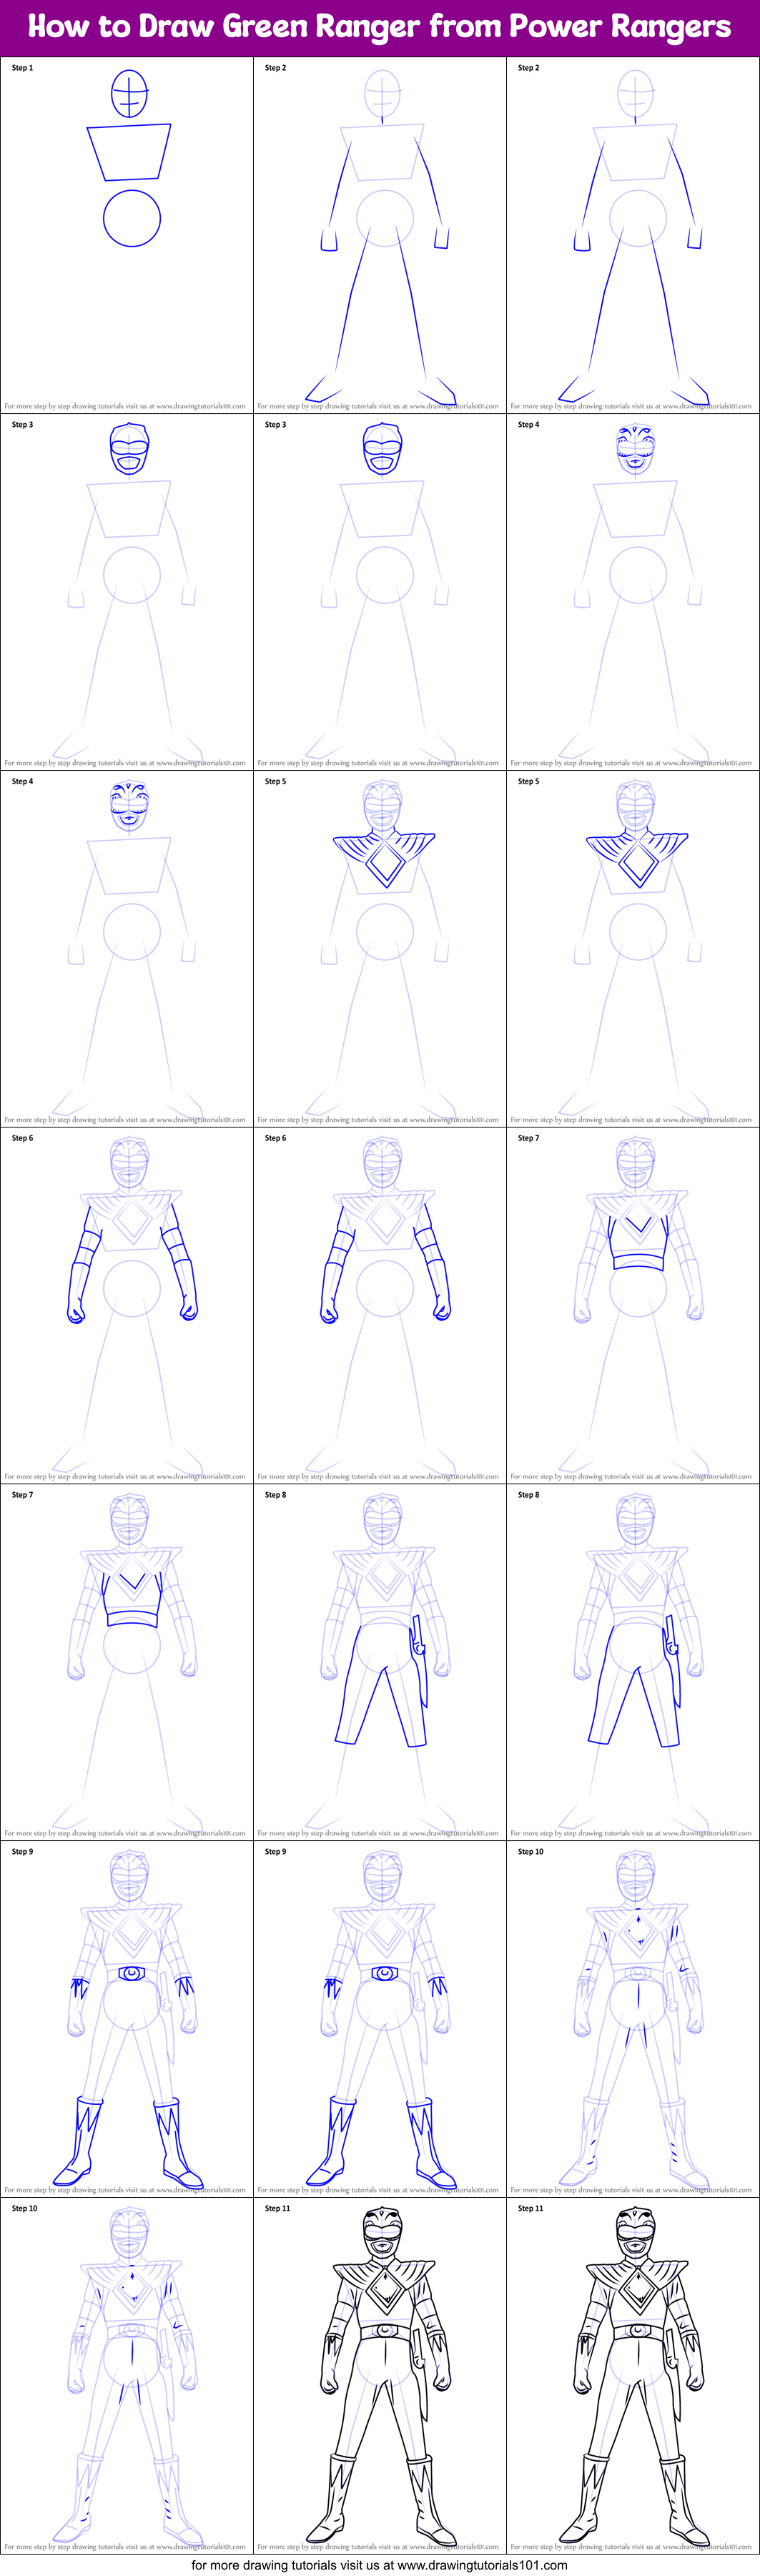 How To Draw Green Ranger From Power Rangers Printable Step By Step